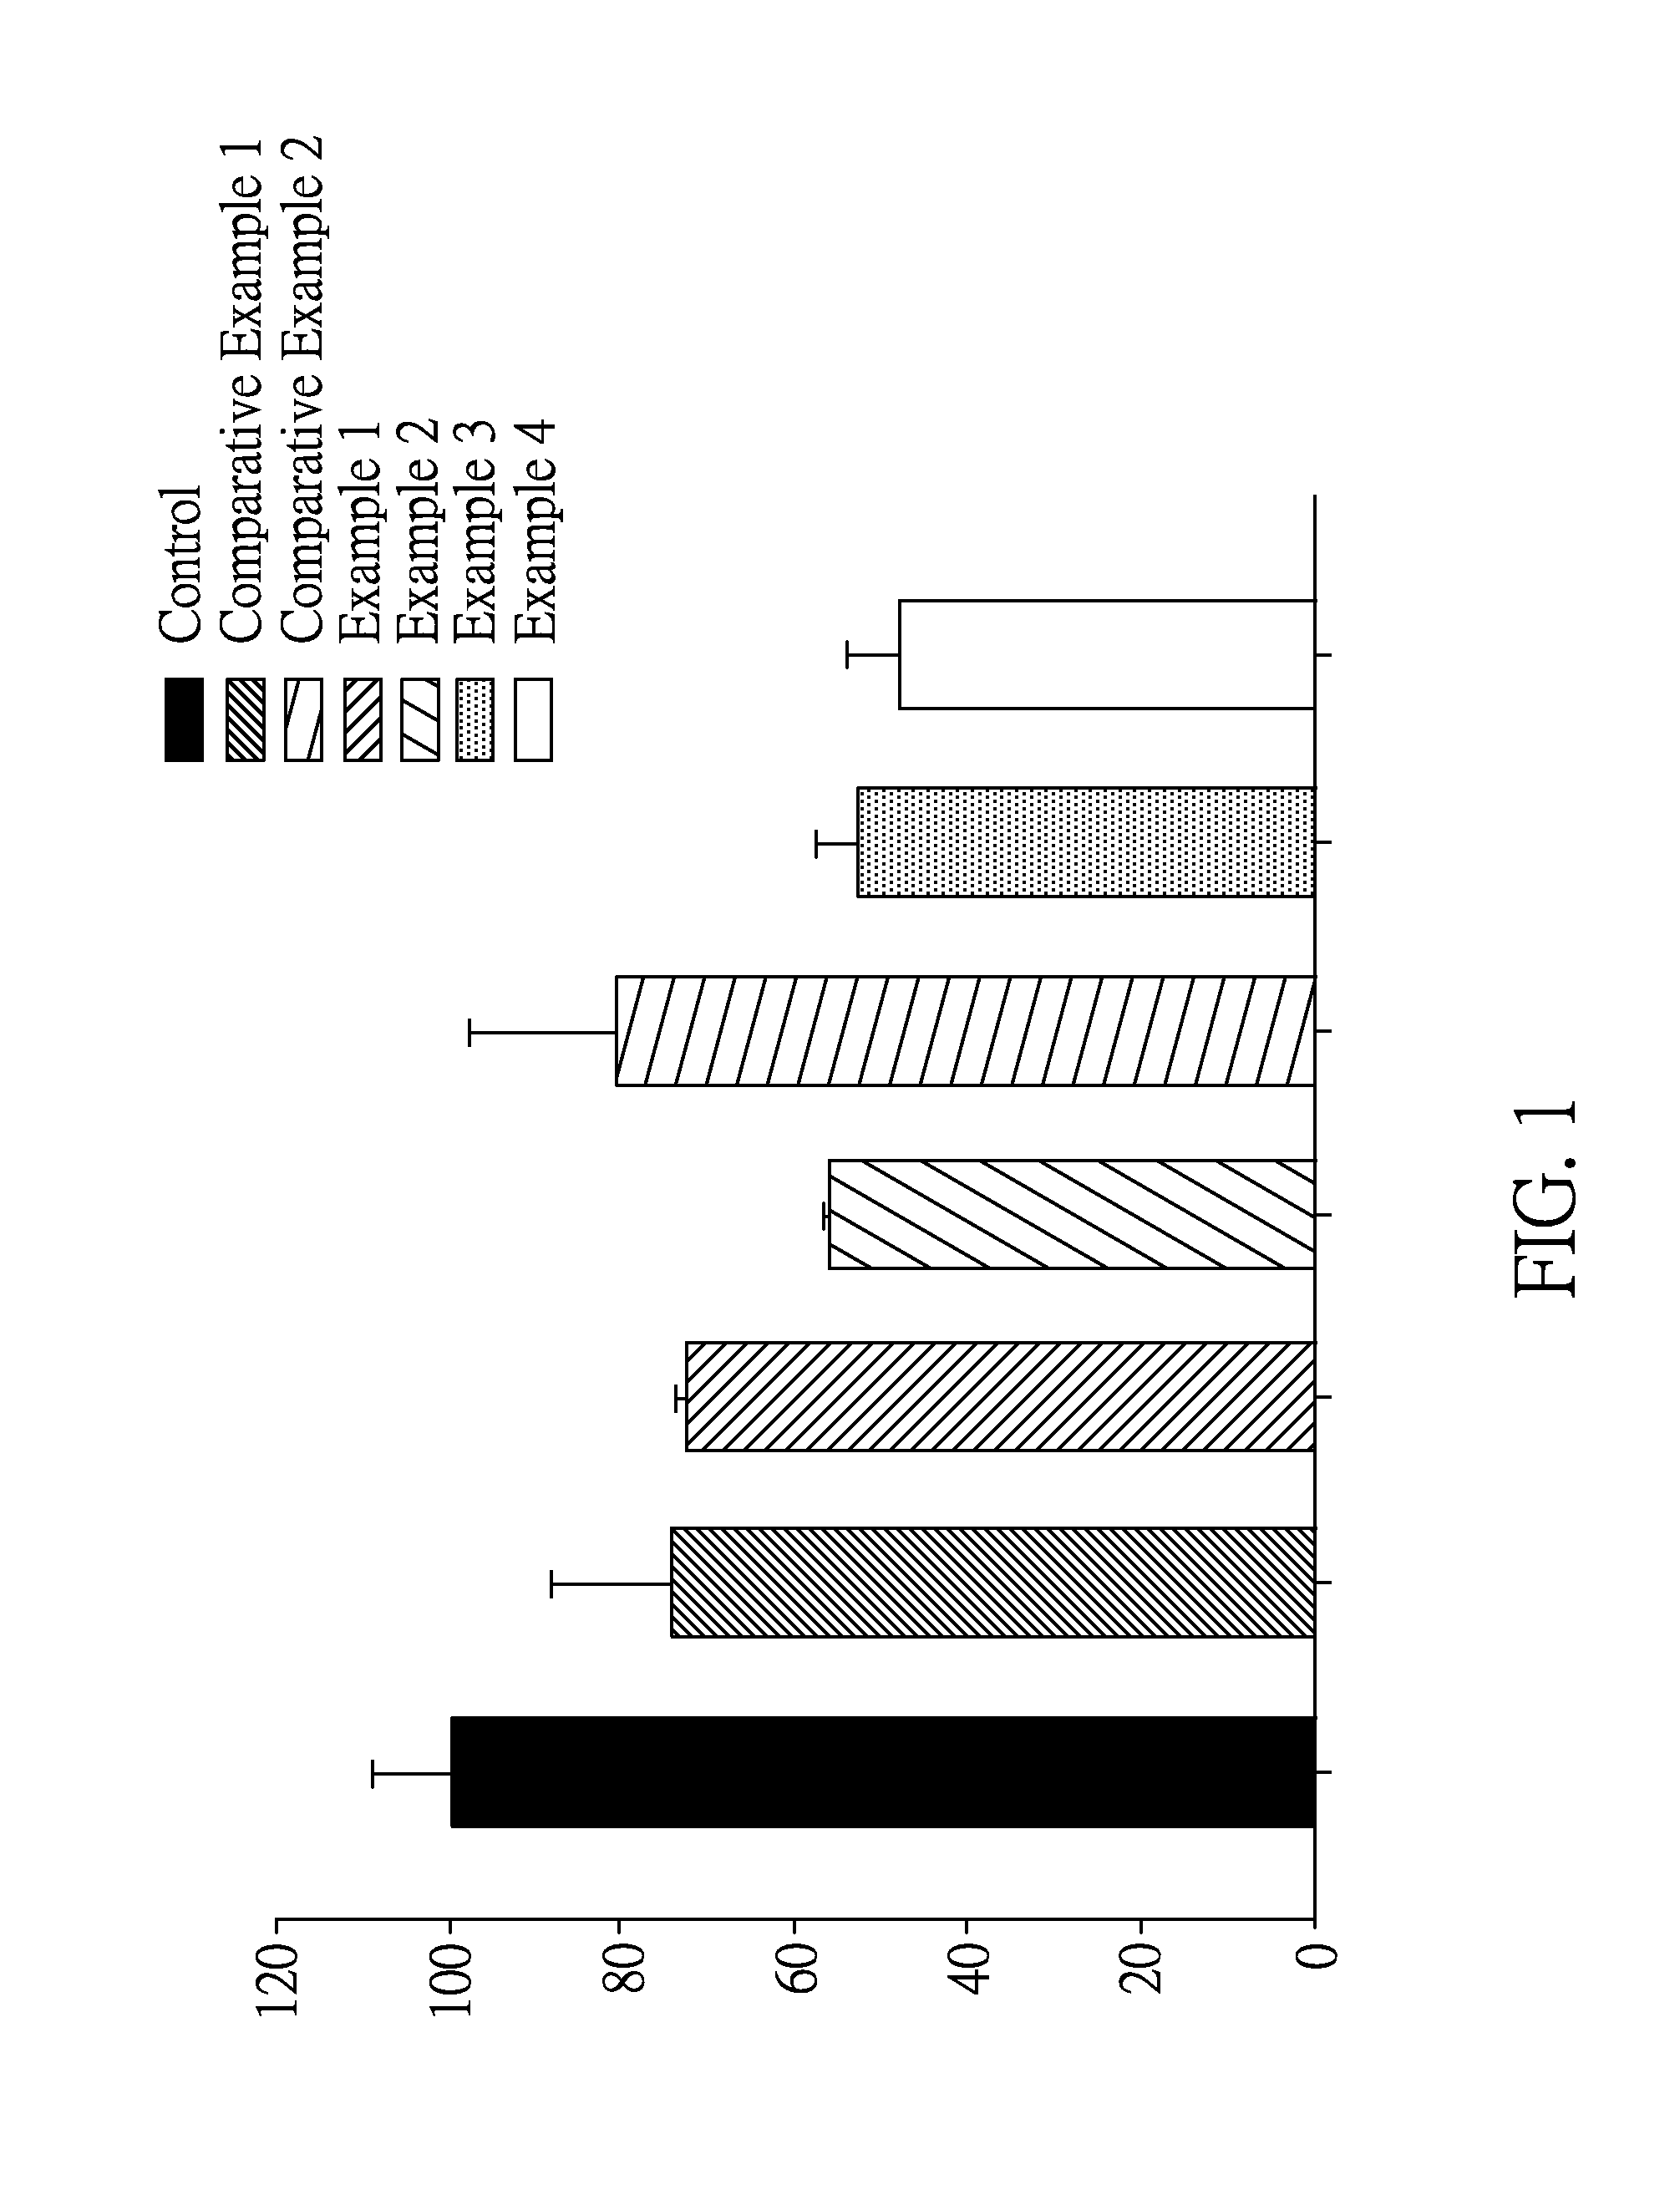 Surface treatment method for implant